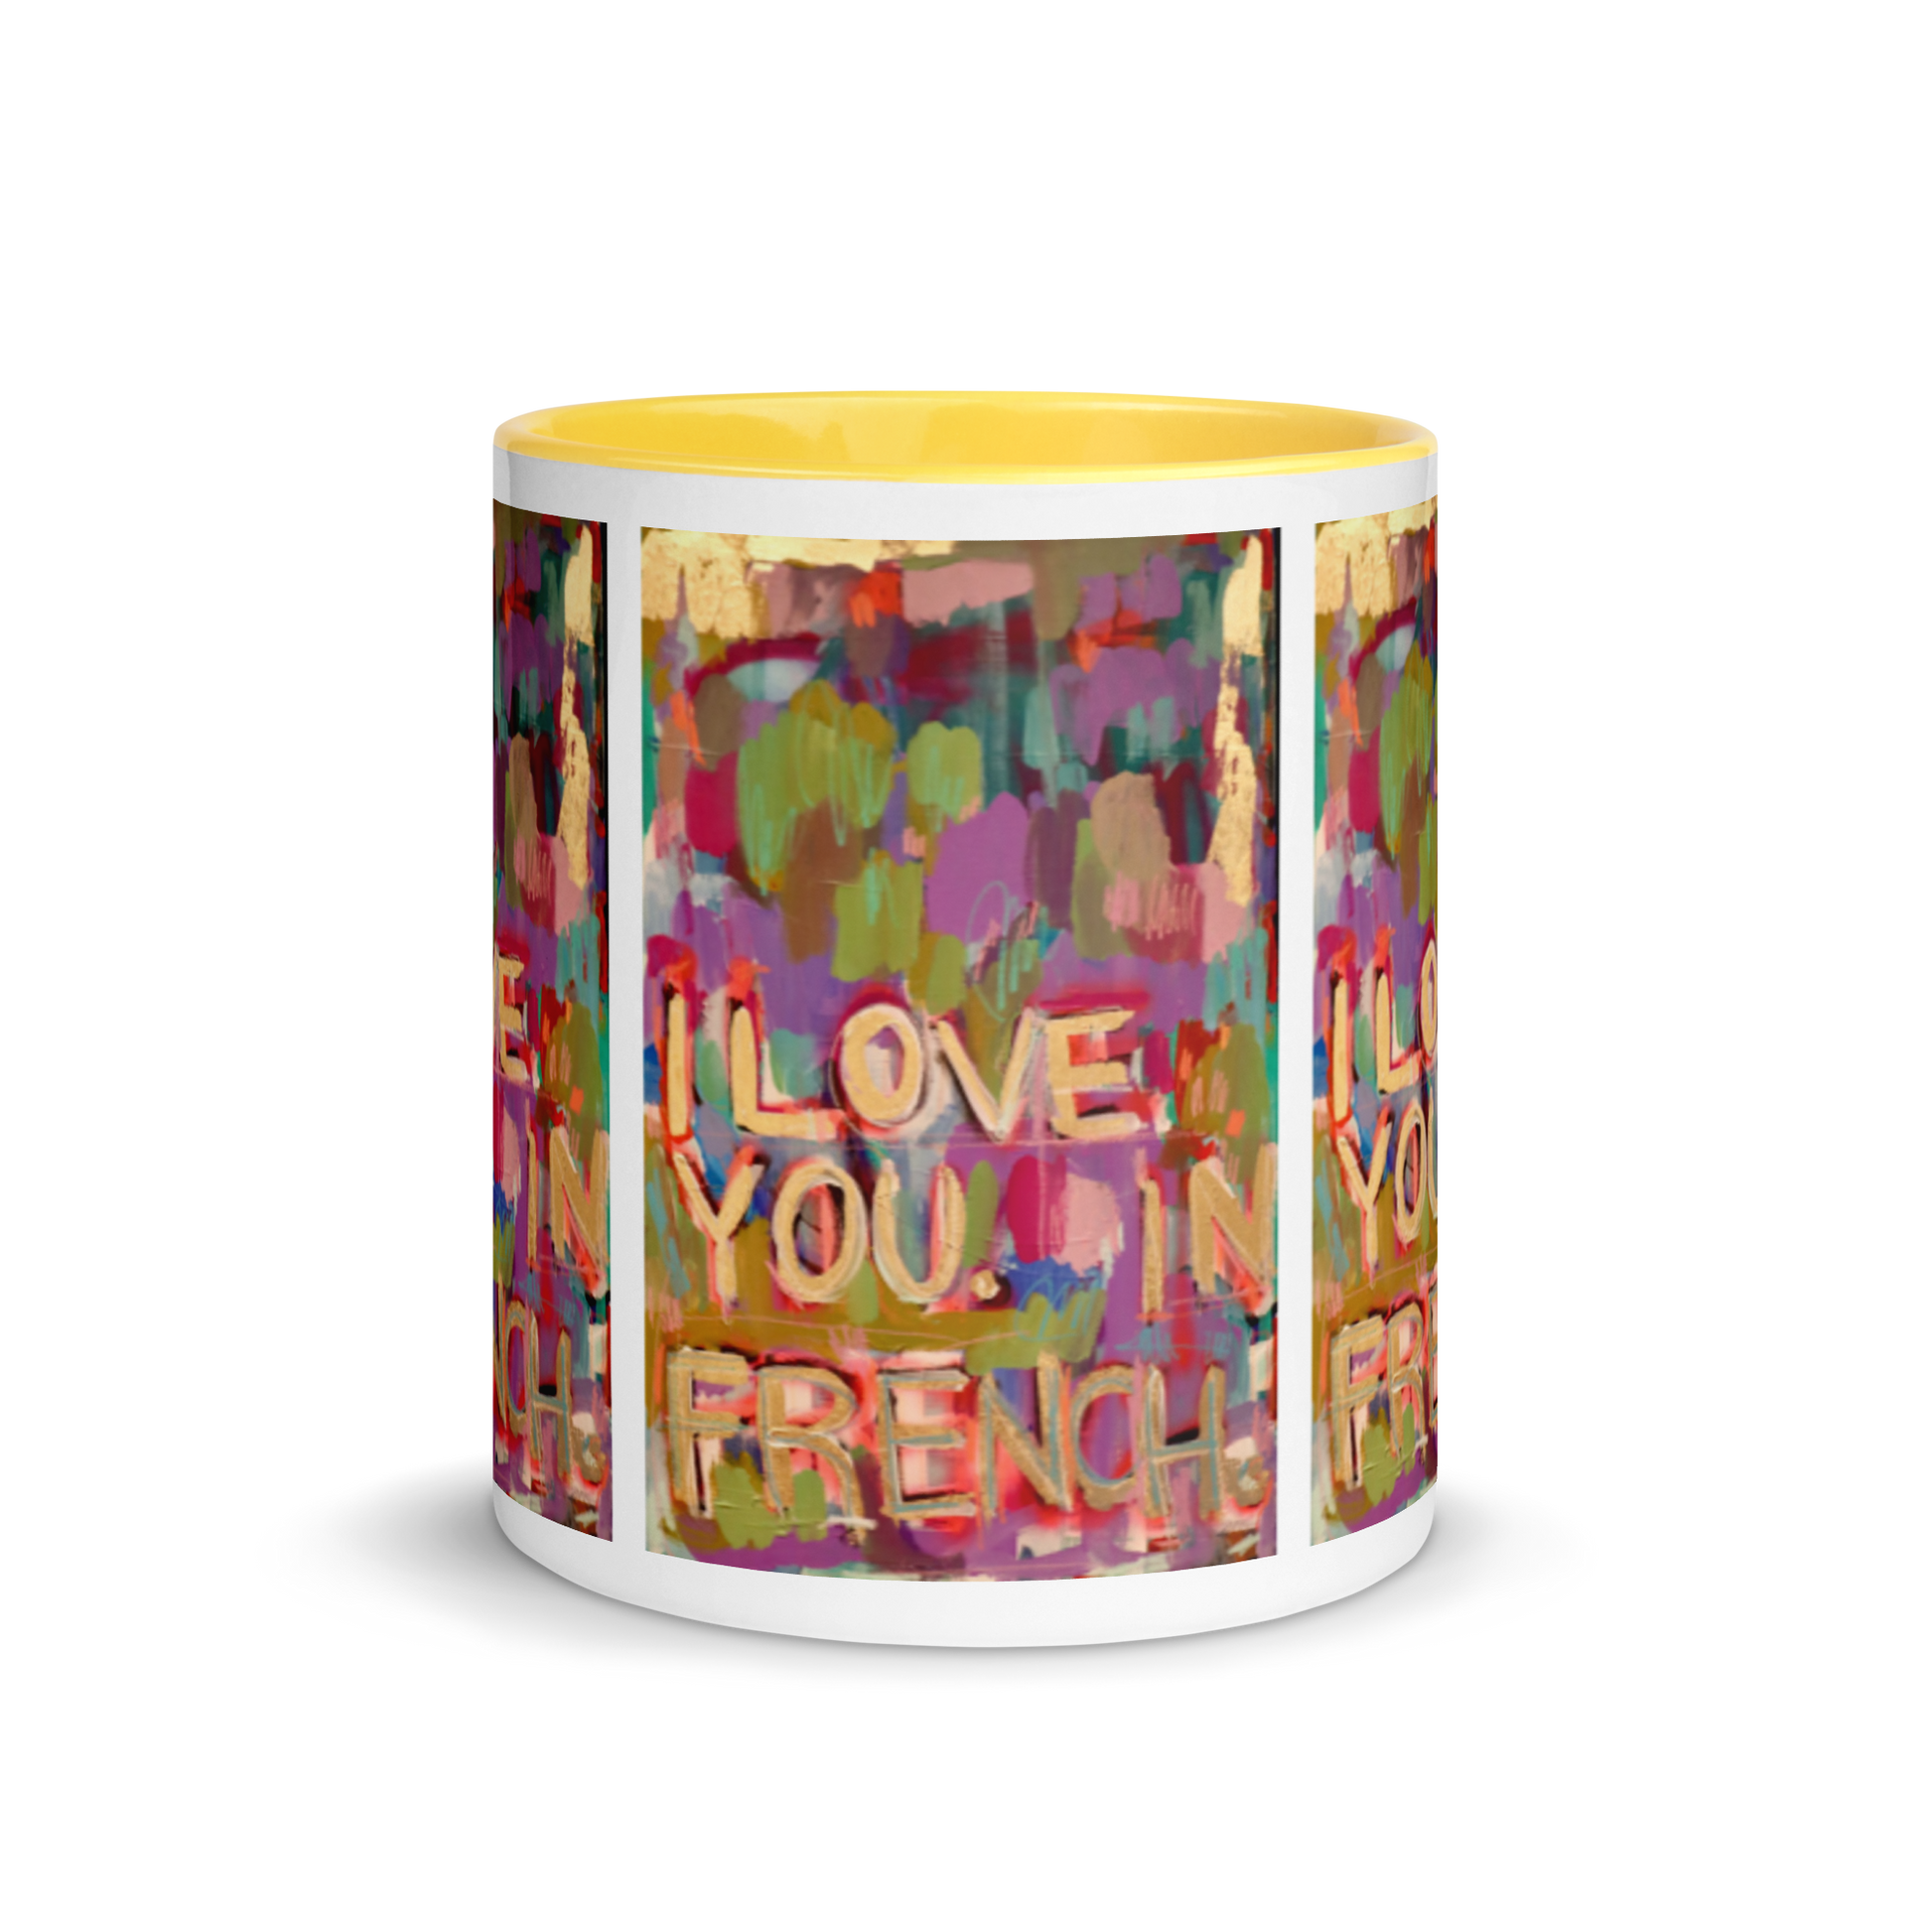 I Love You in French - Mug with Color Inside